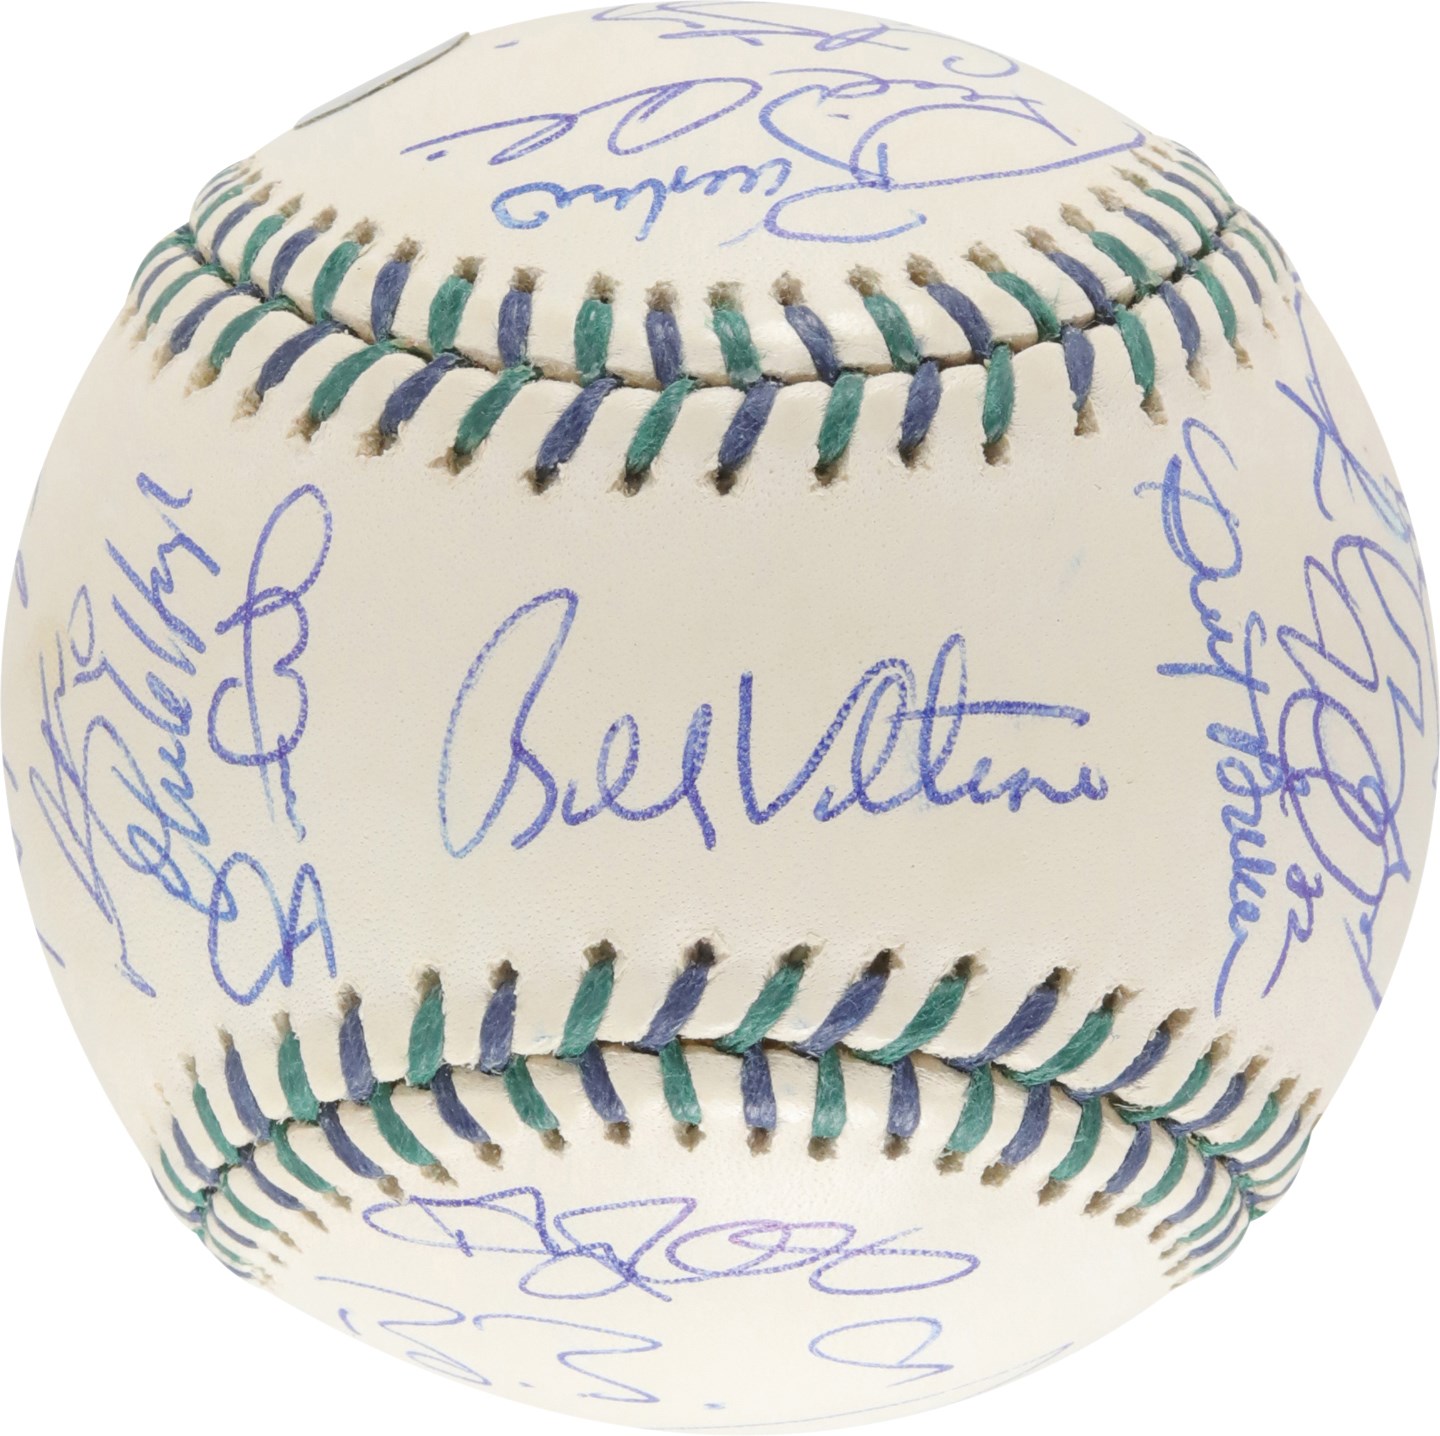 - 2001 American & National League All Star Teams Signed Baseball from Home Run Derby (MLB)